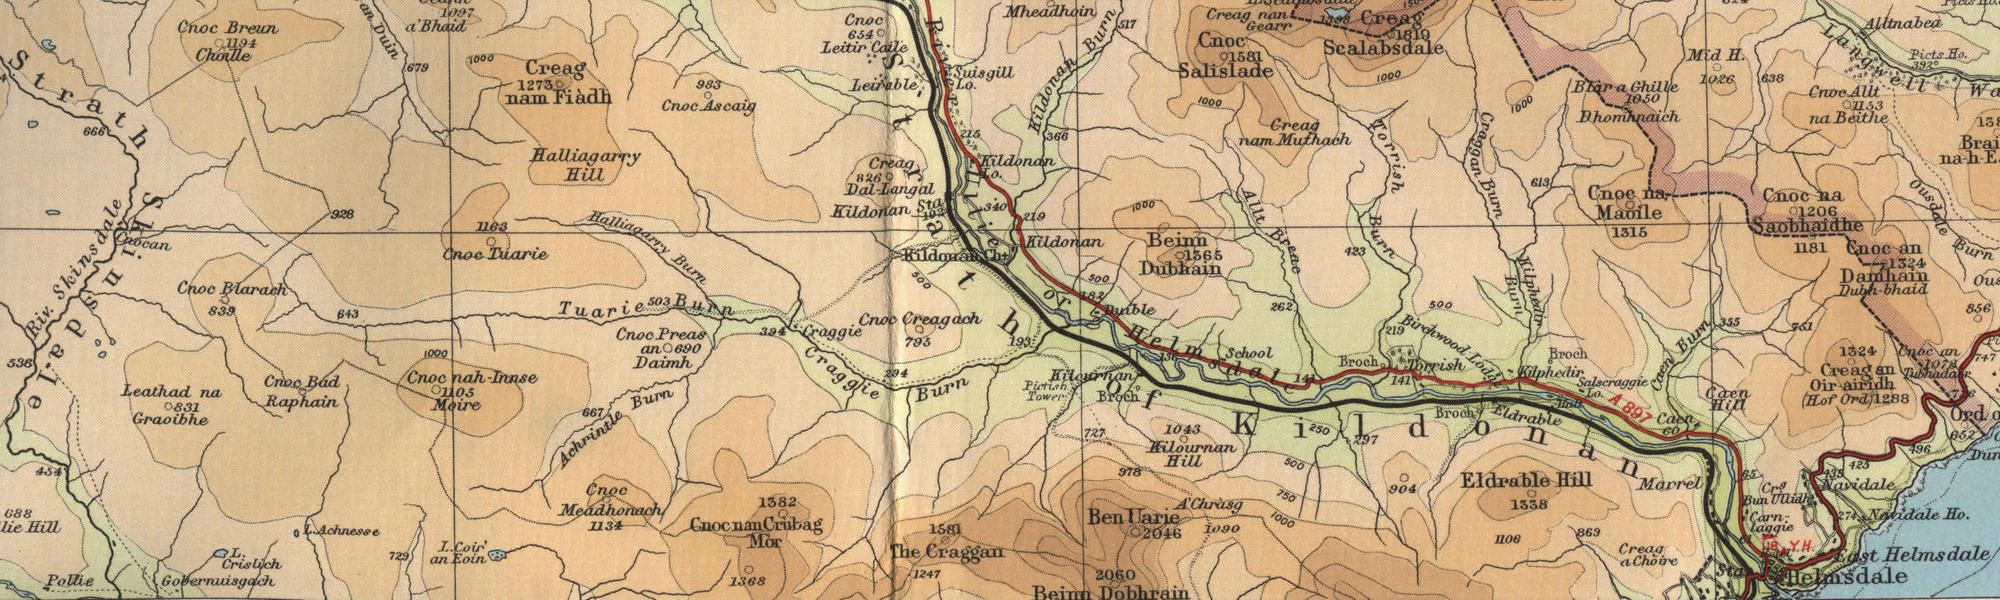 River Helmsdale Map